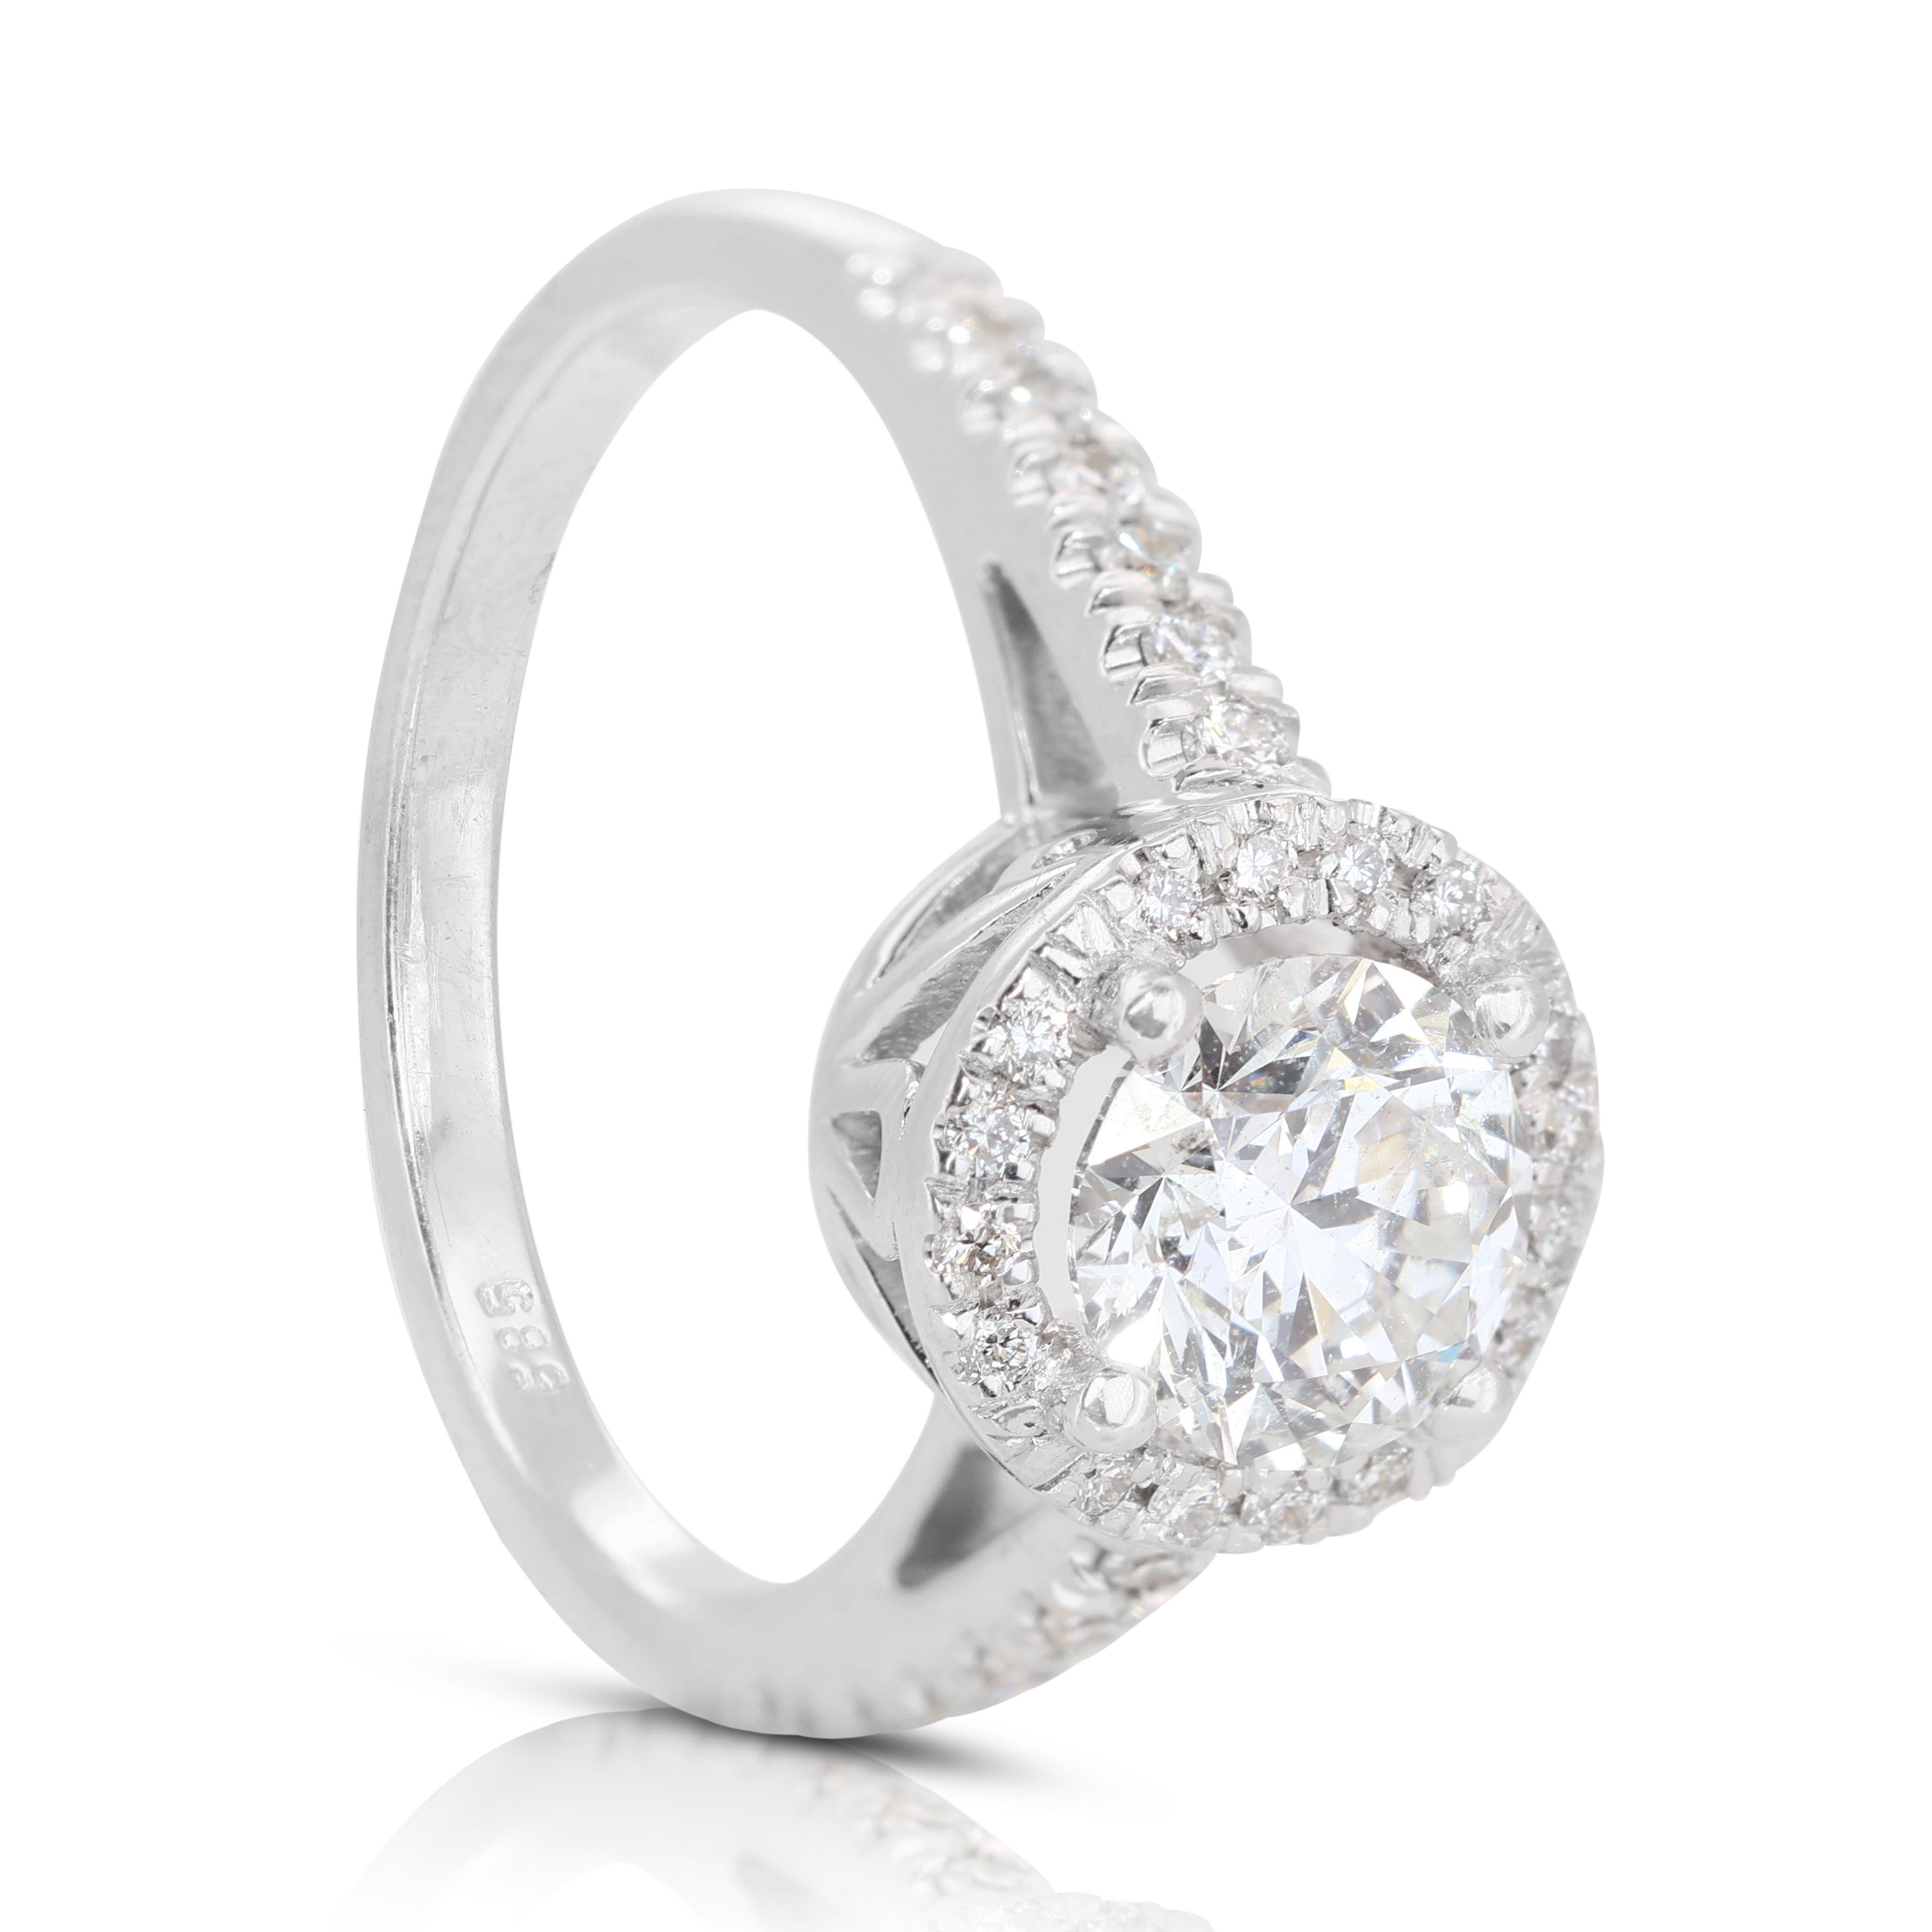 Dazzling 0.70ct Pave Halo Diamond Ring set in 14K White Gold For Sale 3